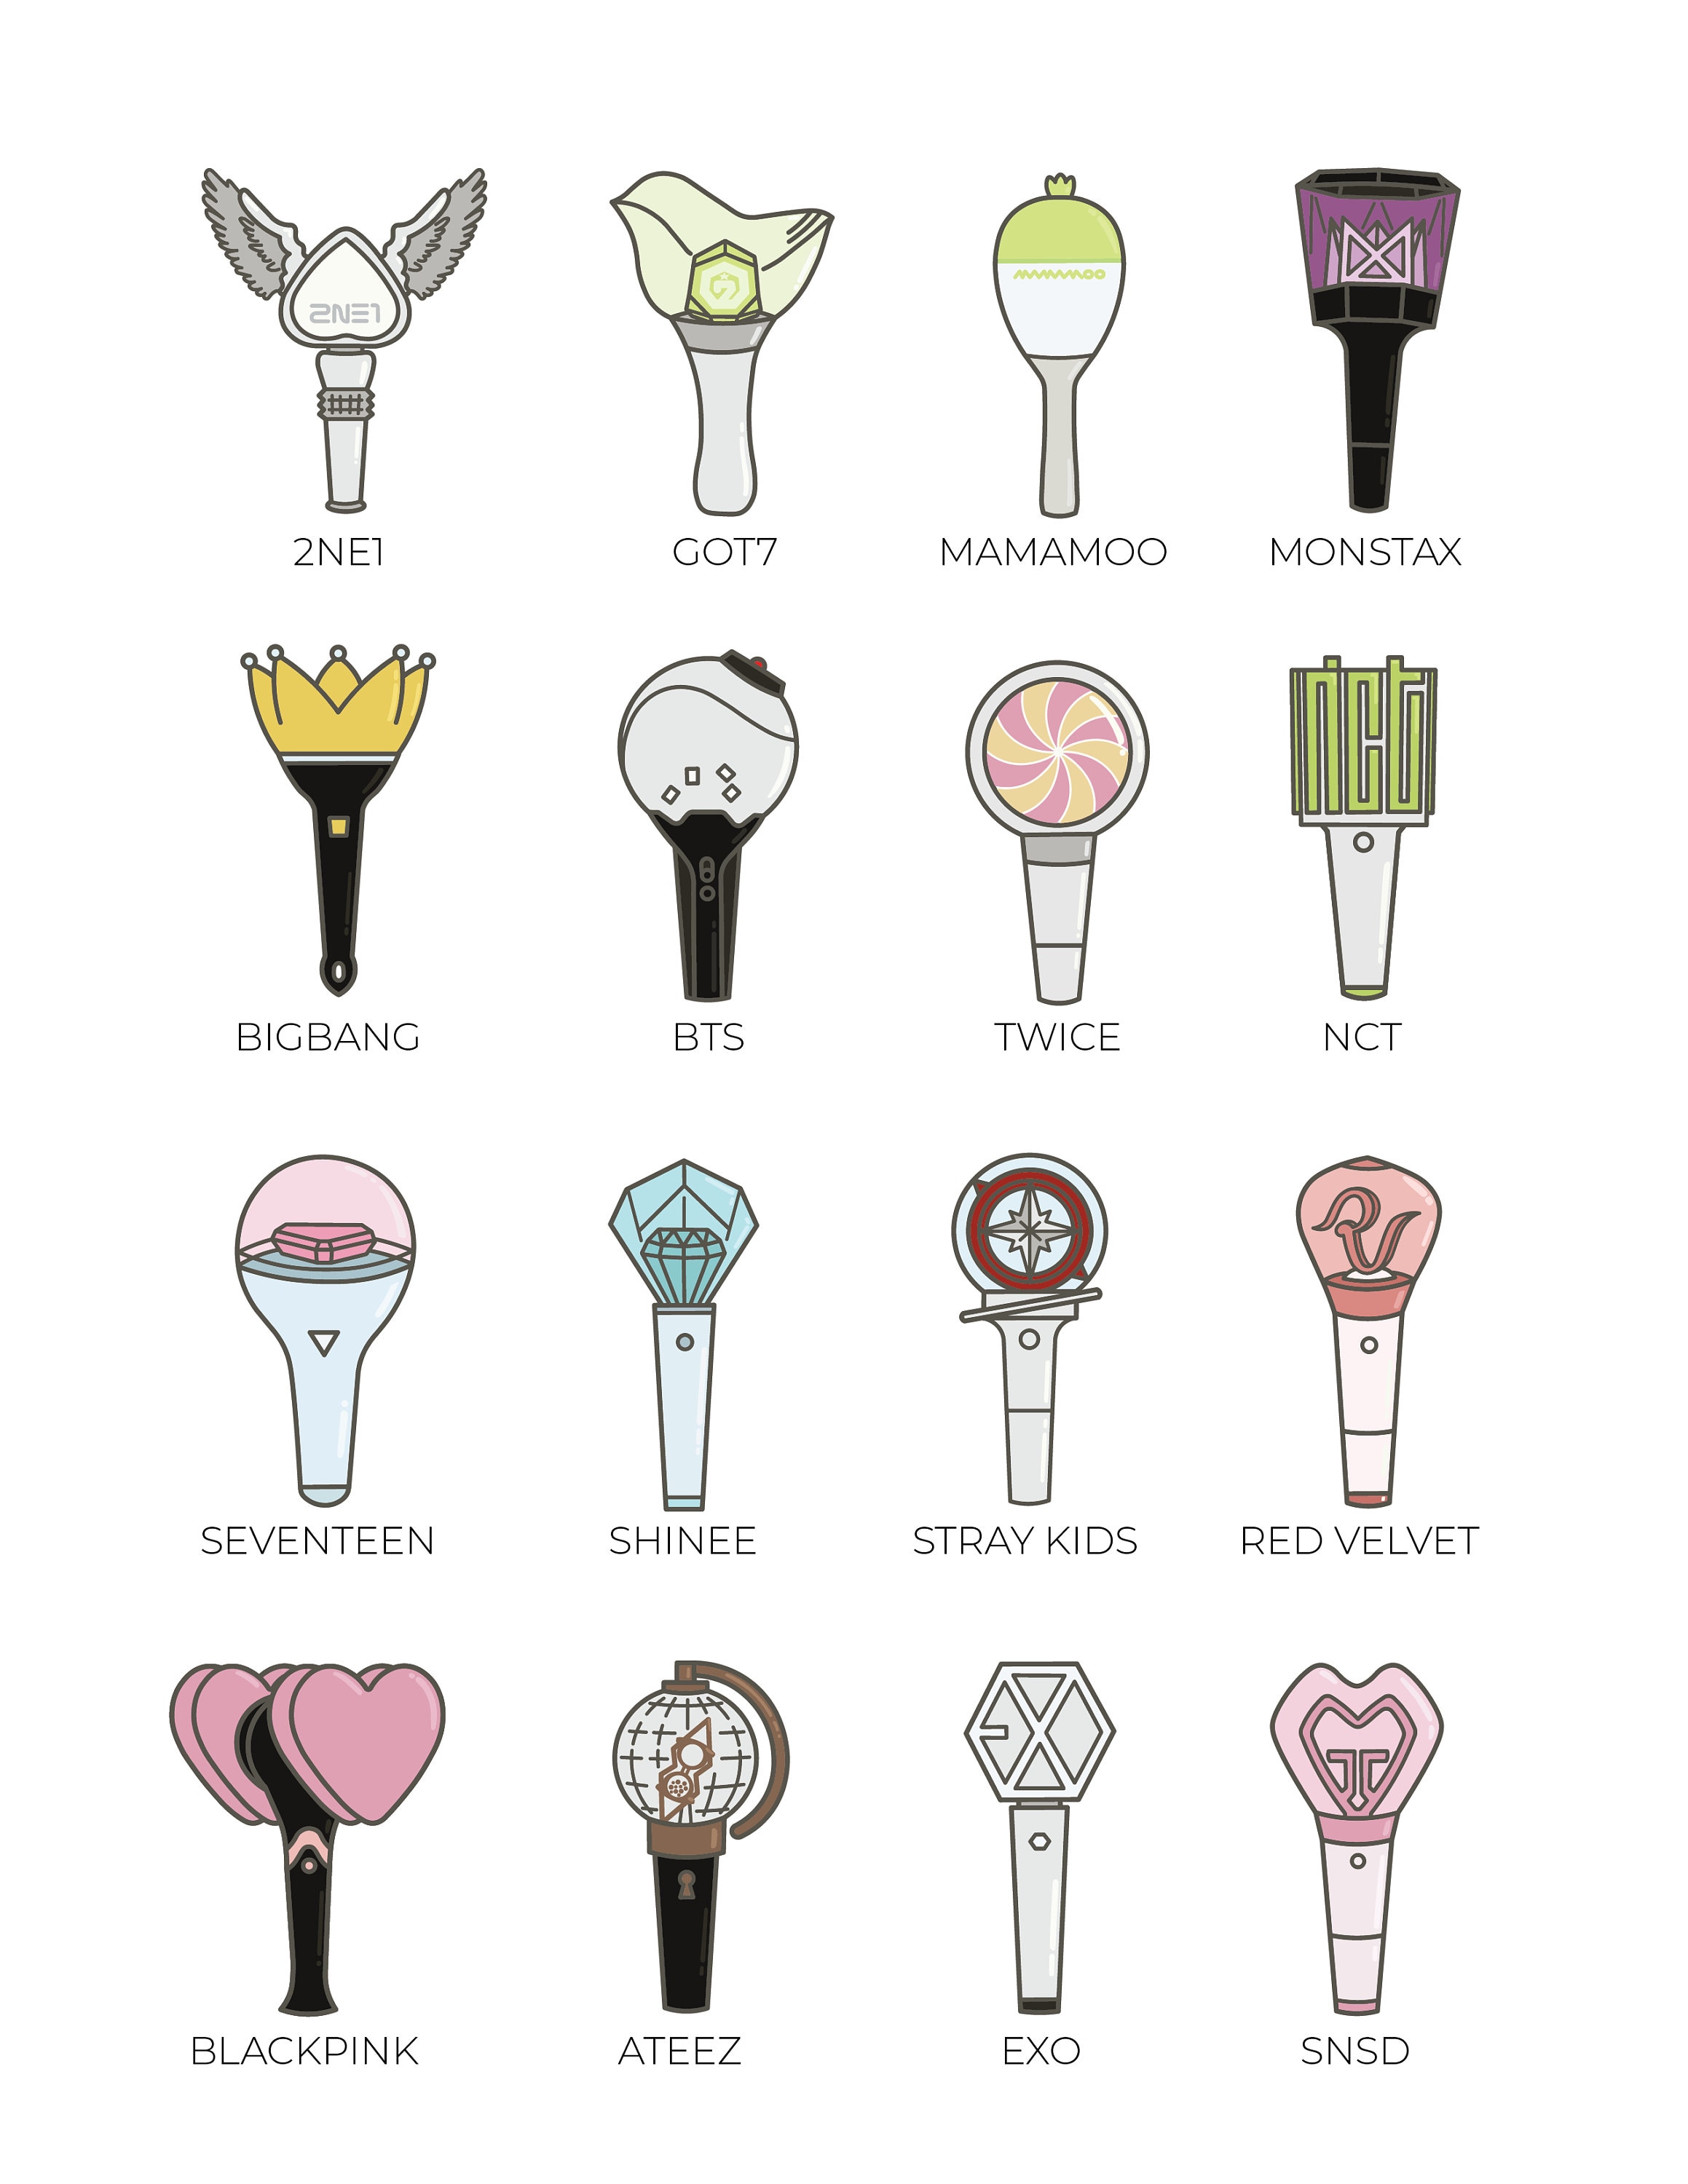 Kpop Lightstick Stickers Multiple Groups available | Etsy